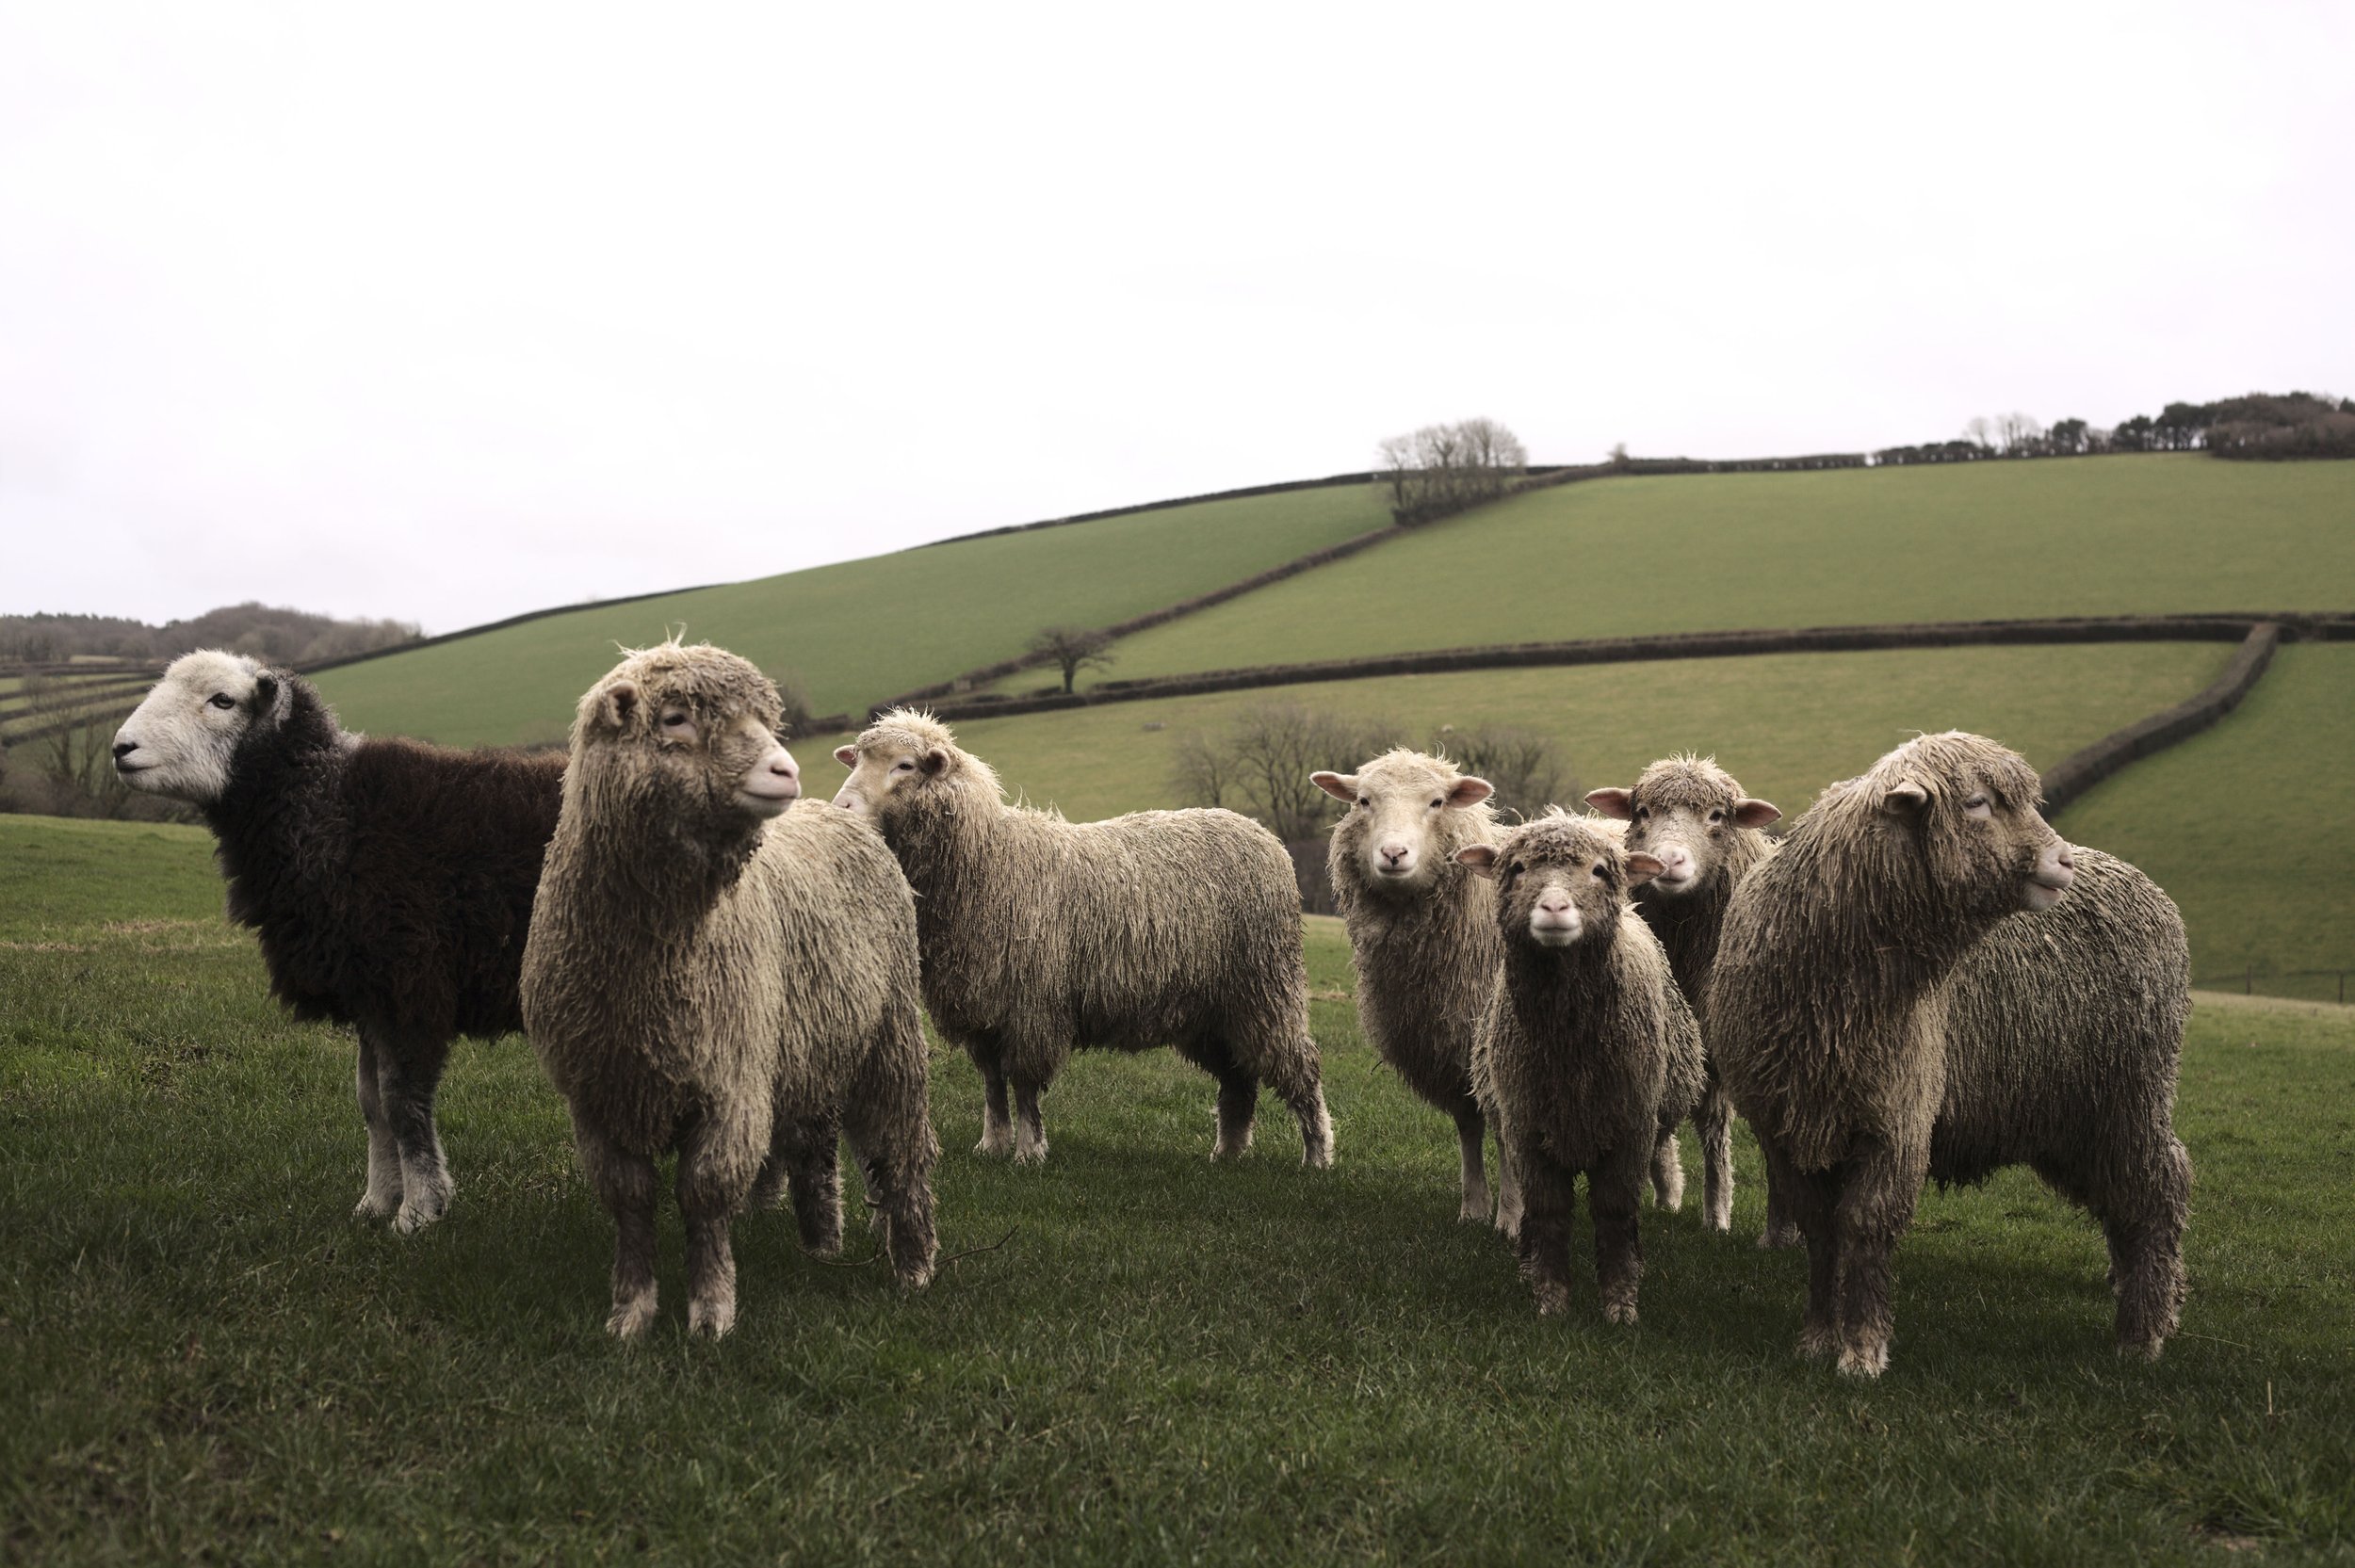  A chance encounter with merino sheep at the local livestock market led to Rushlade Farm diversifying their traditional hill farm which had previously focused on commercial meat breeds of sheep. 